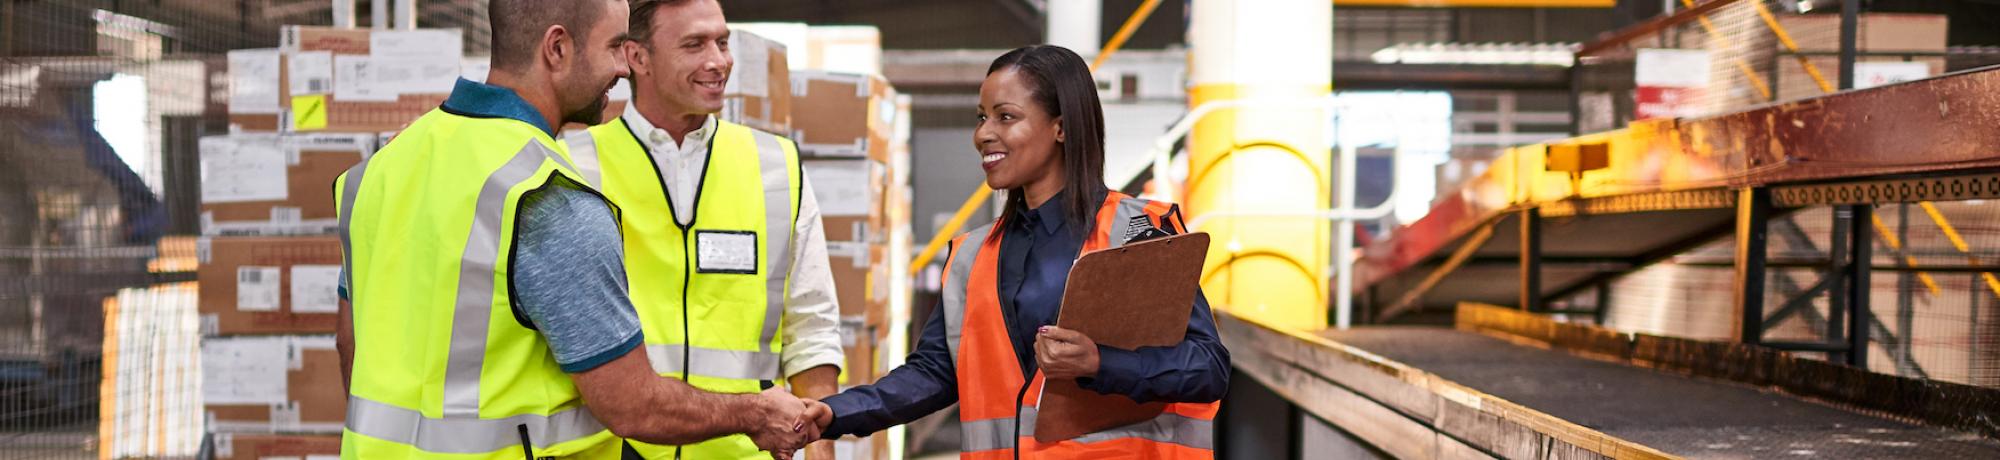 woman and men in safety vests talking and shaking hands in a warehouse